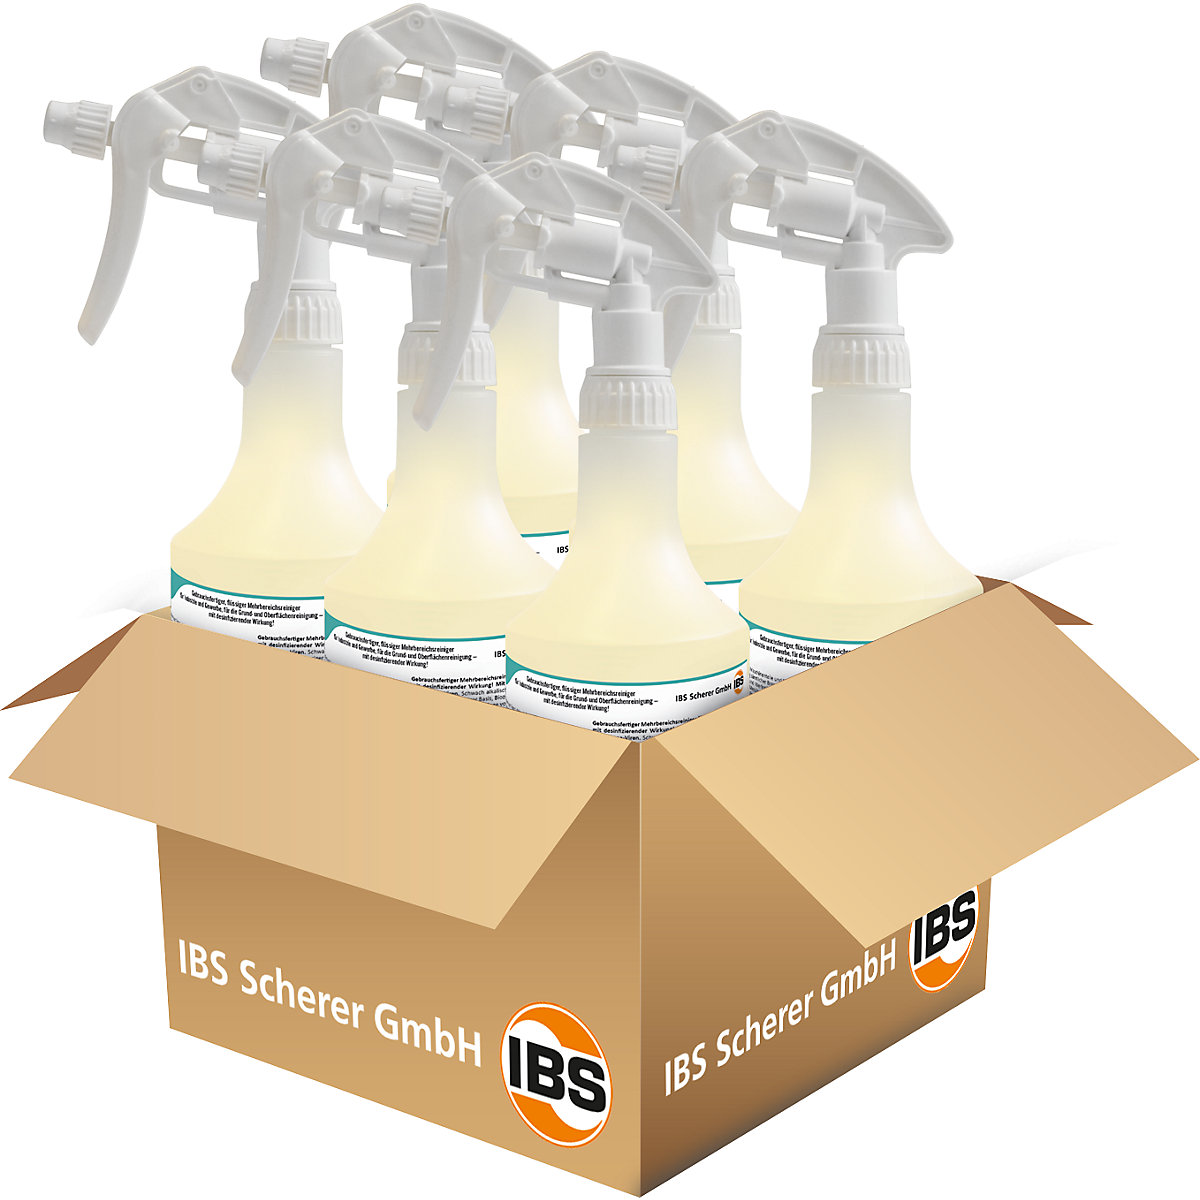 WAS 50.500 special cleaning solution – IBS Scherer